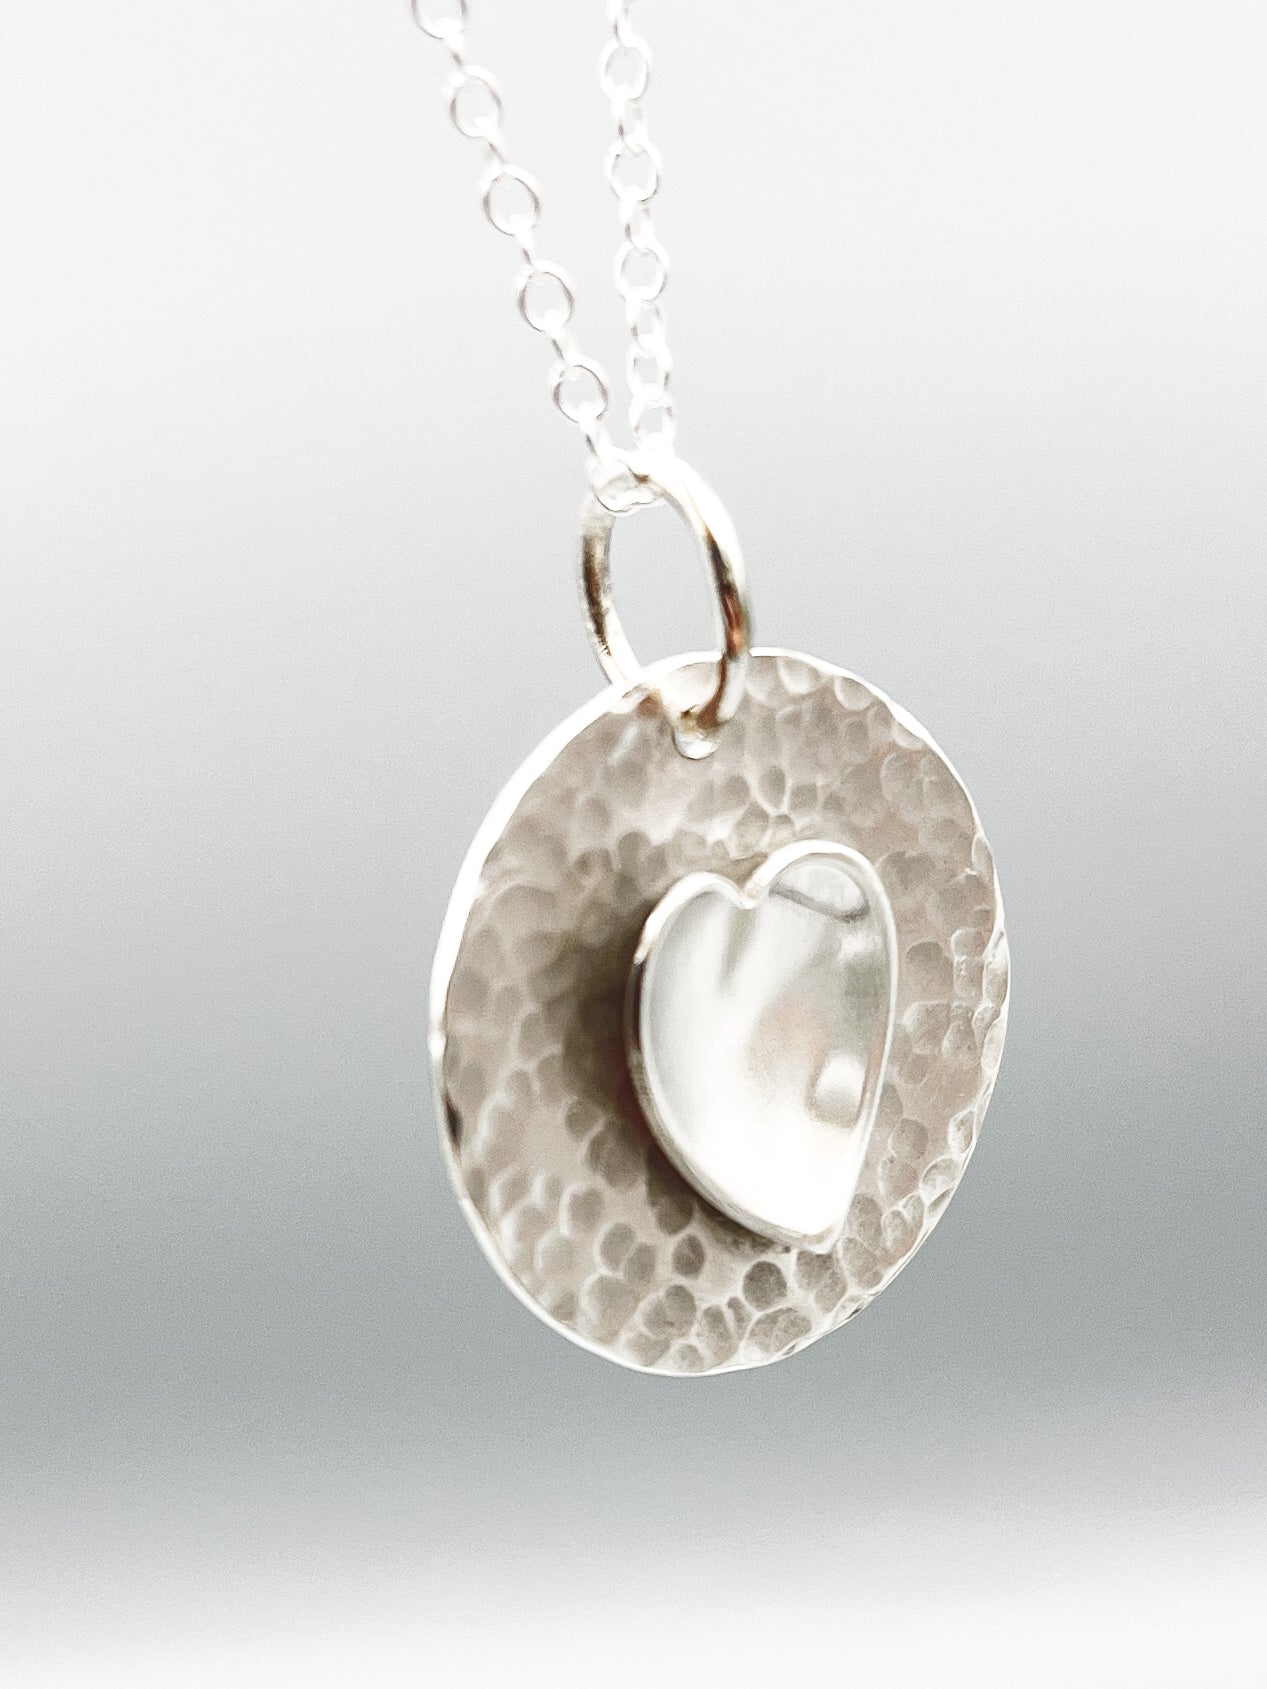 Sterling Silver pendant. A polished heart on a hammered disc on a 16" chain